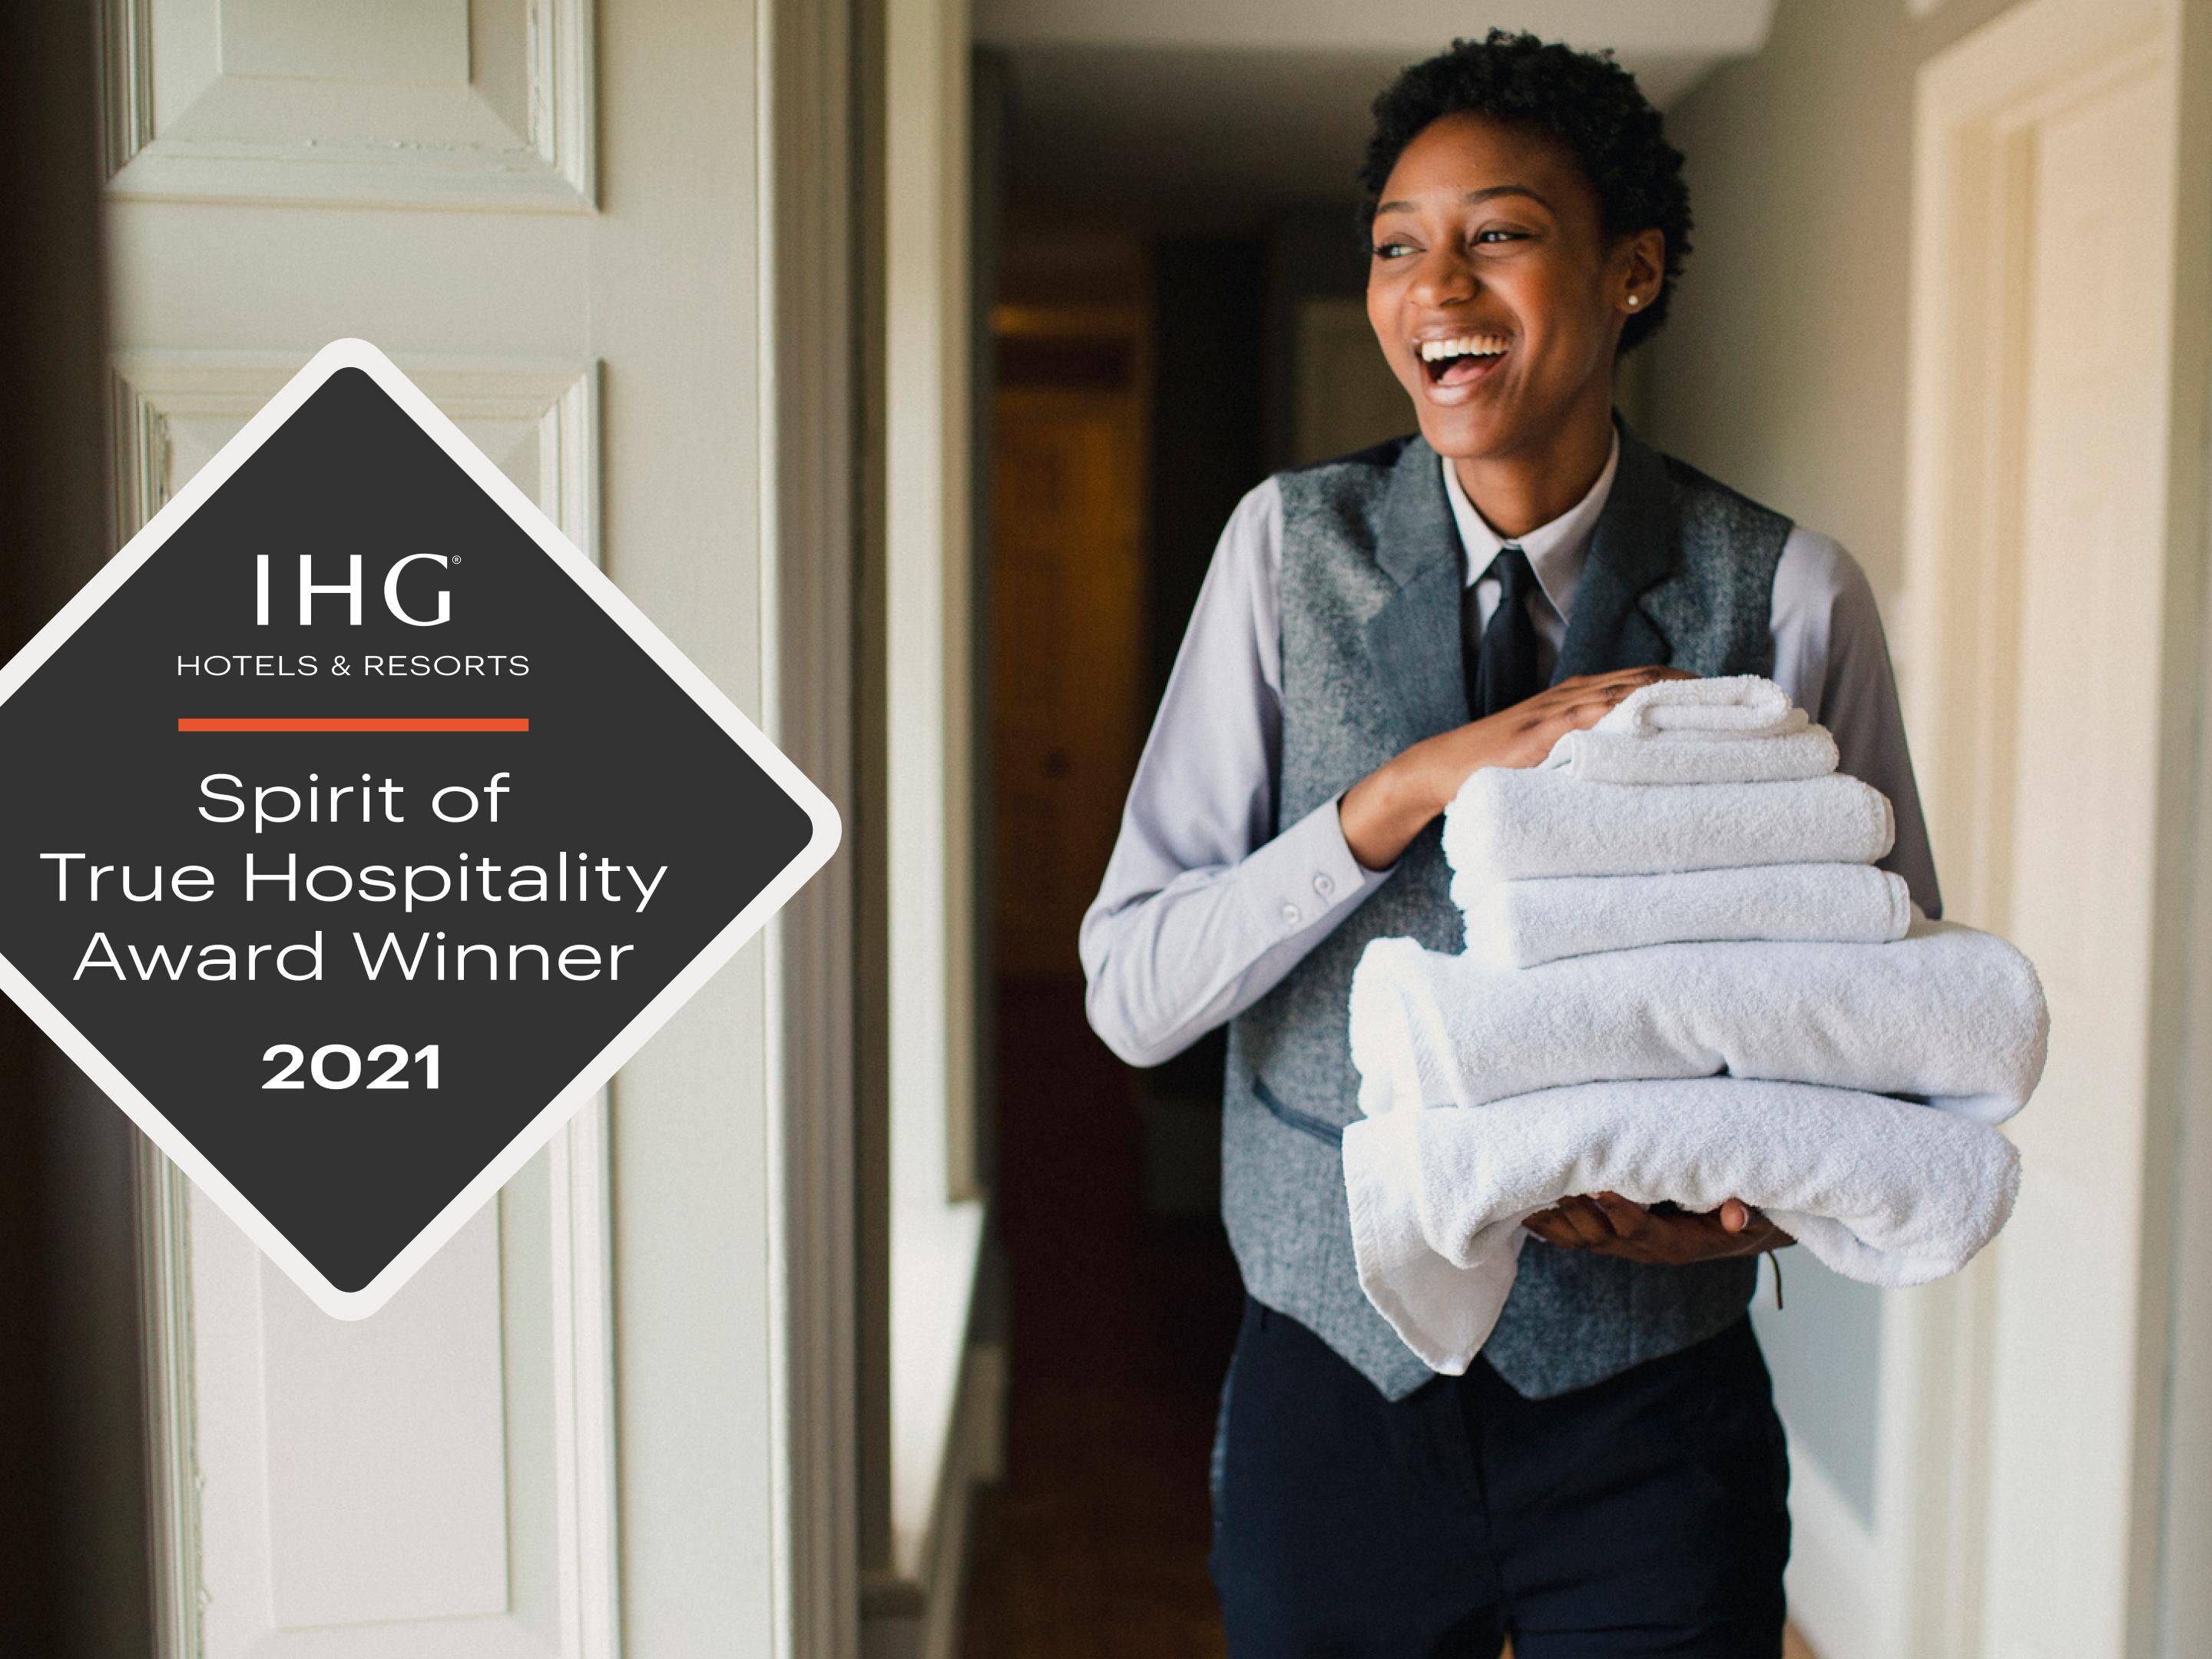 This hotel is recognized within the 4,000+ hotel IHG Americas system for the highest levels of excellence in quality, satisfaction, and cleanliness.